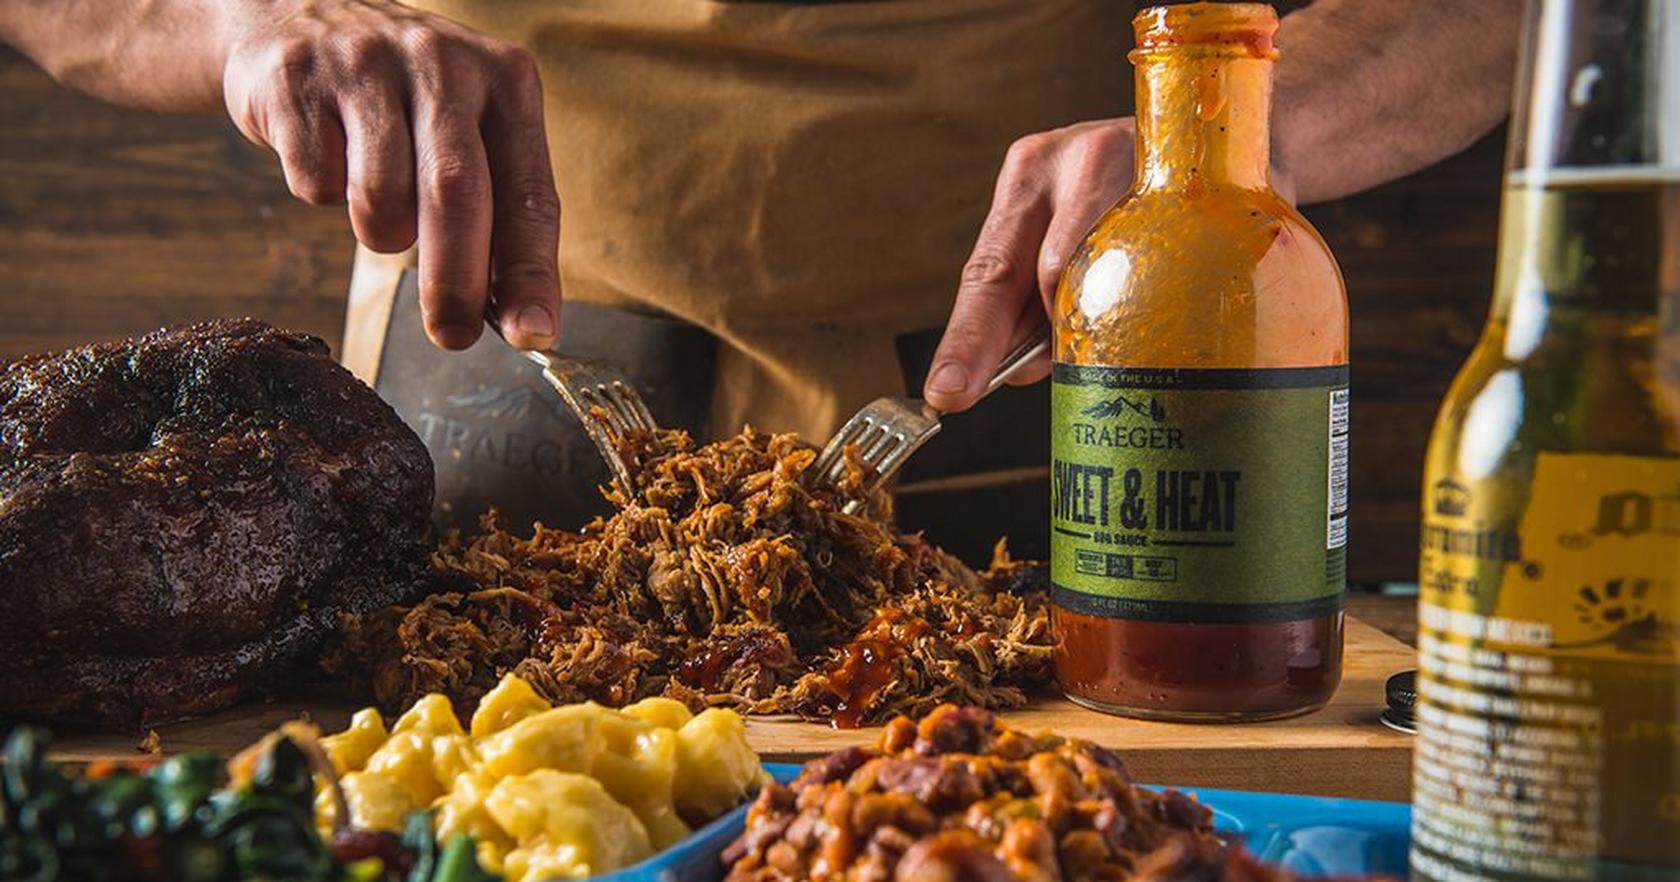 BBQ Pulled Pork with Sweet & Heat BBQ Sauce